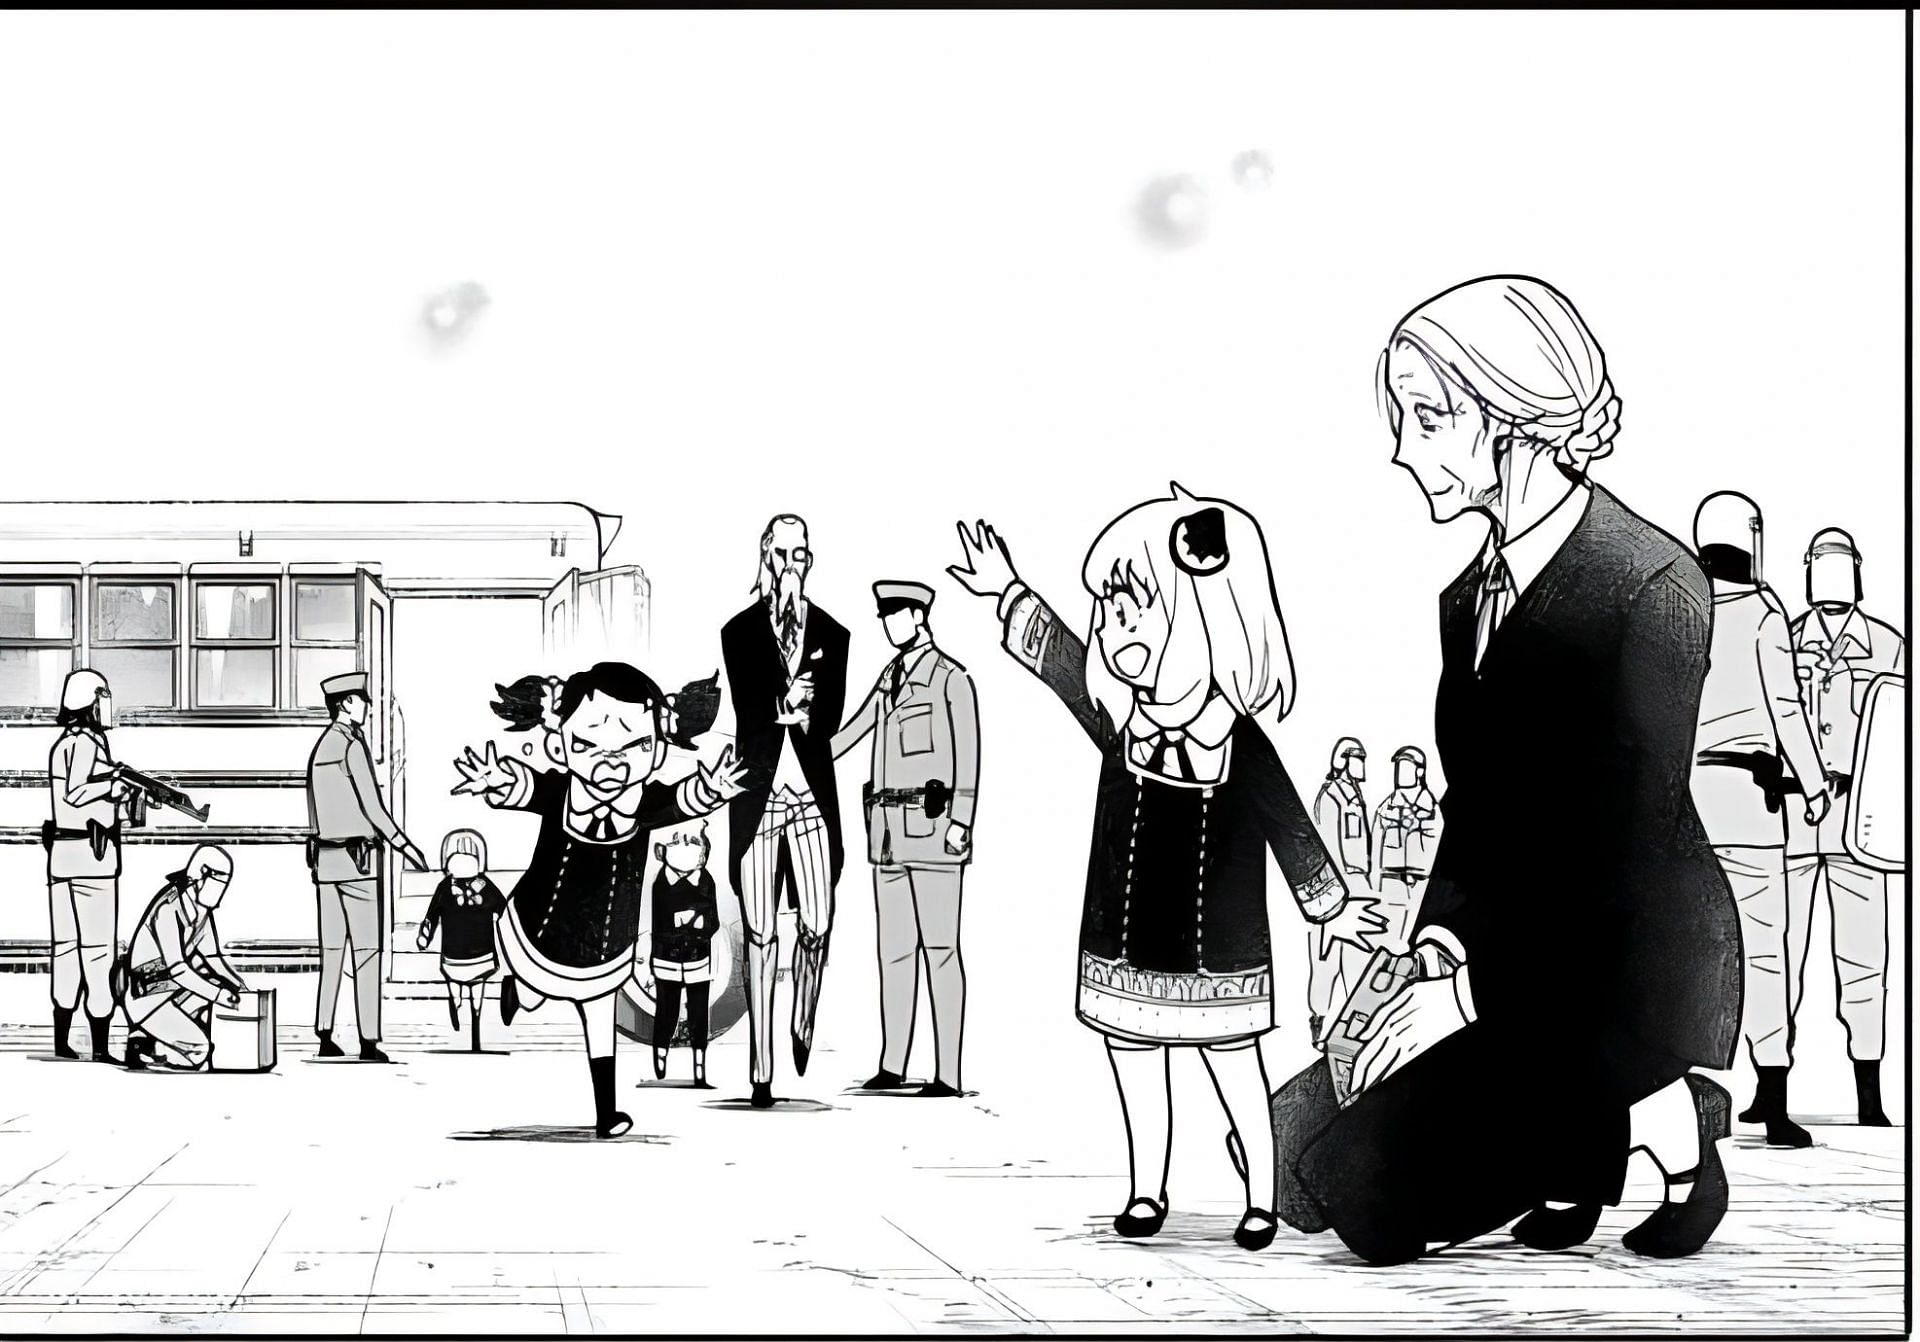 How everything ends in Spy X Family chapter 74 (Image via Tatsuya Endo/Spy X Family)